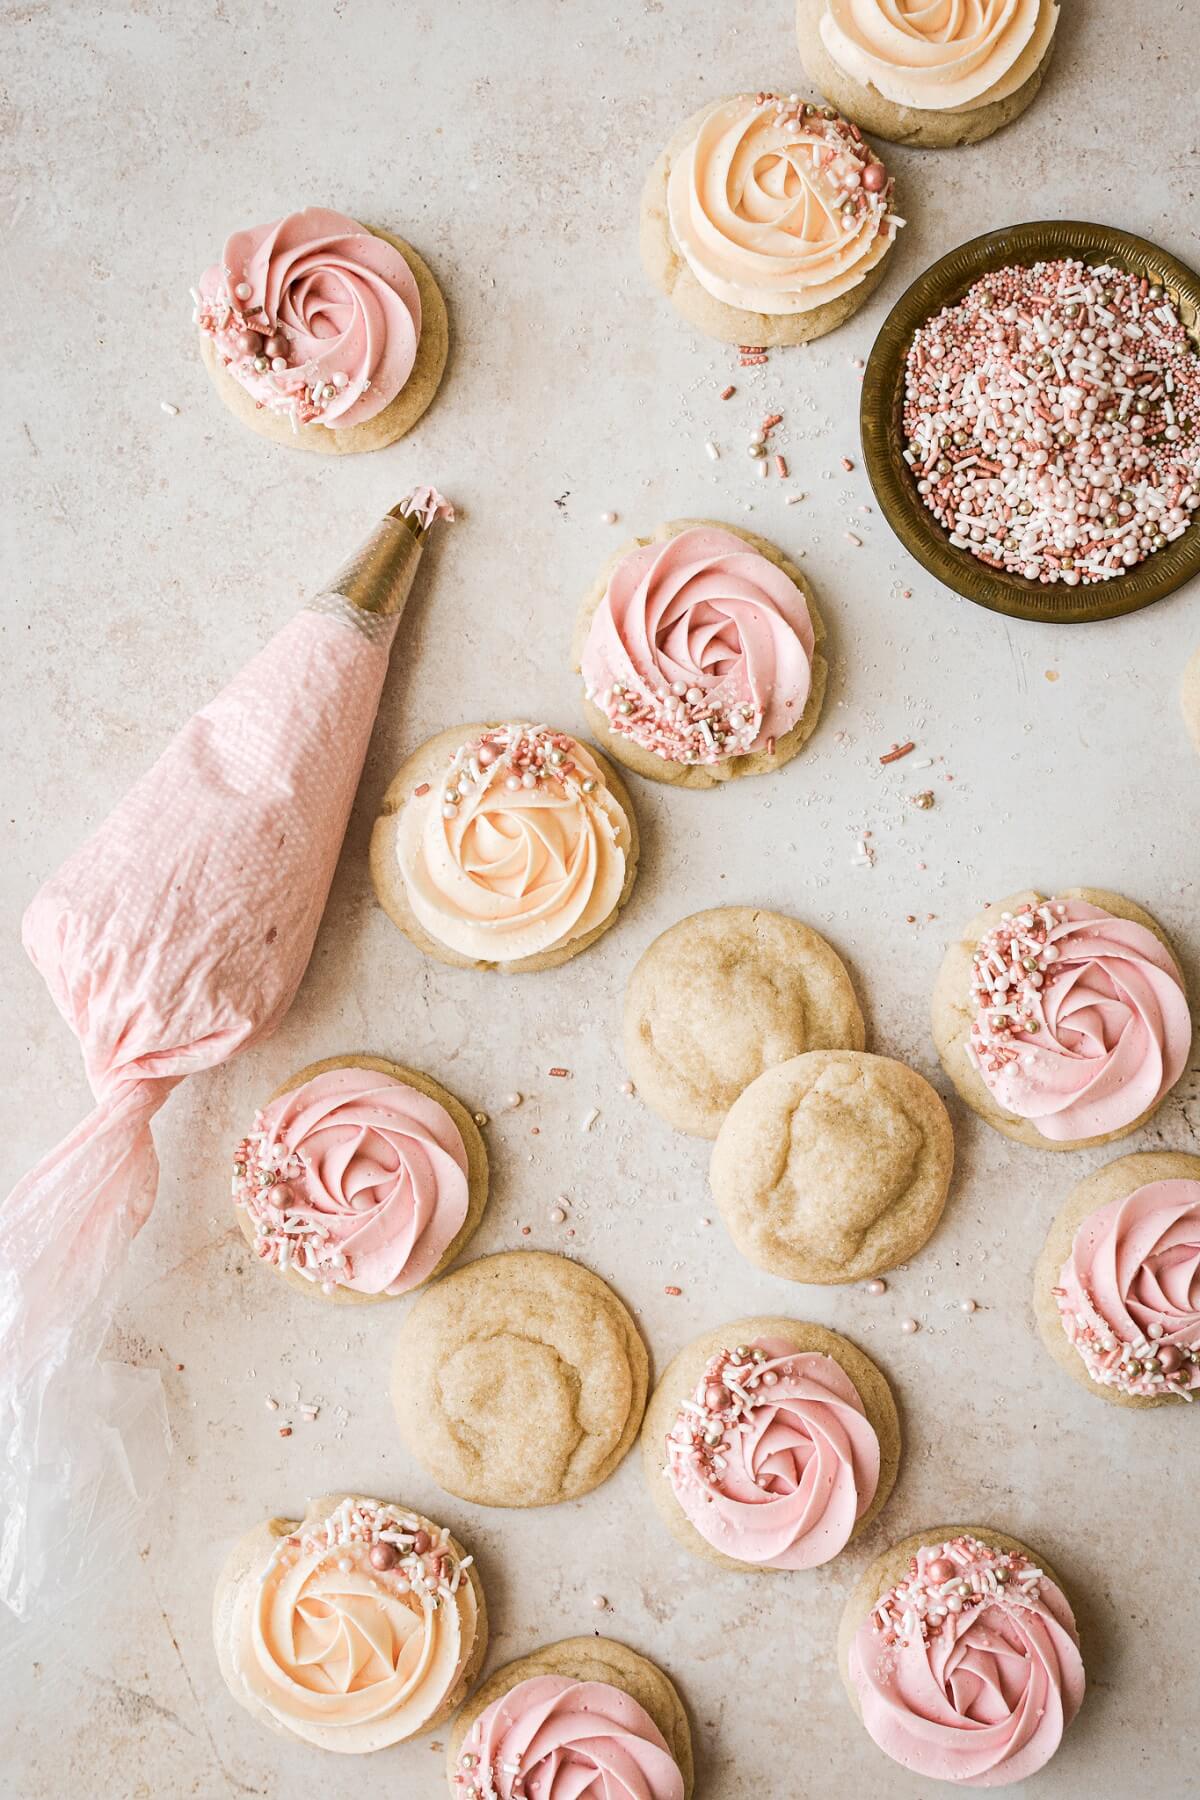 Soft sugar cookies with swirls of pink and orange buttercream and sprinkles.